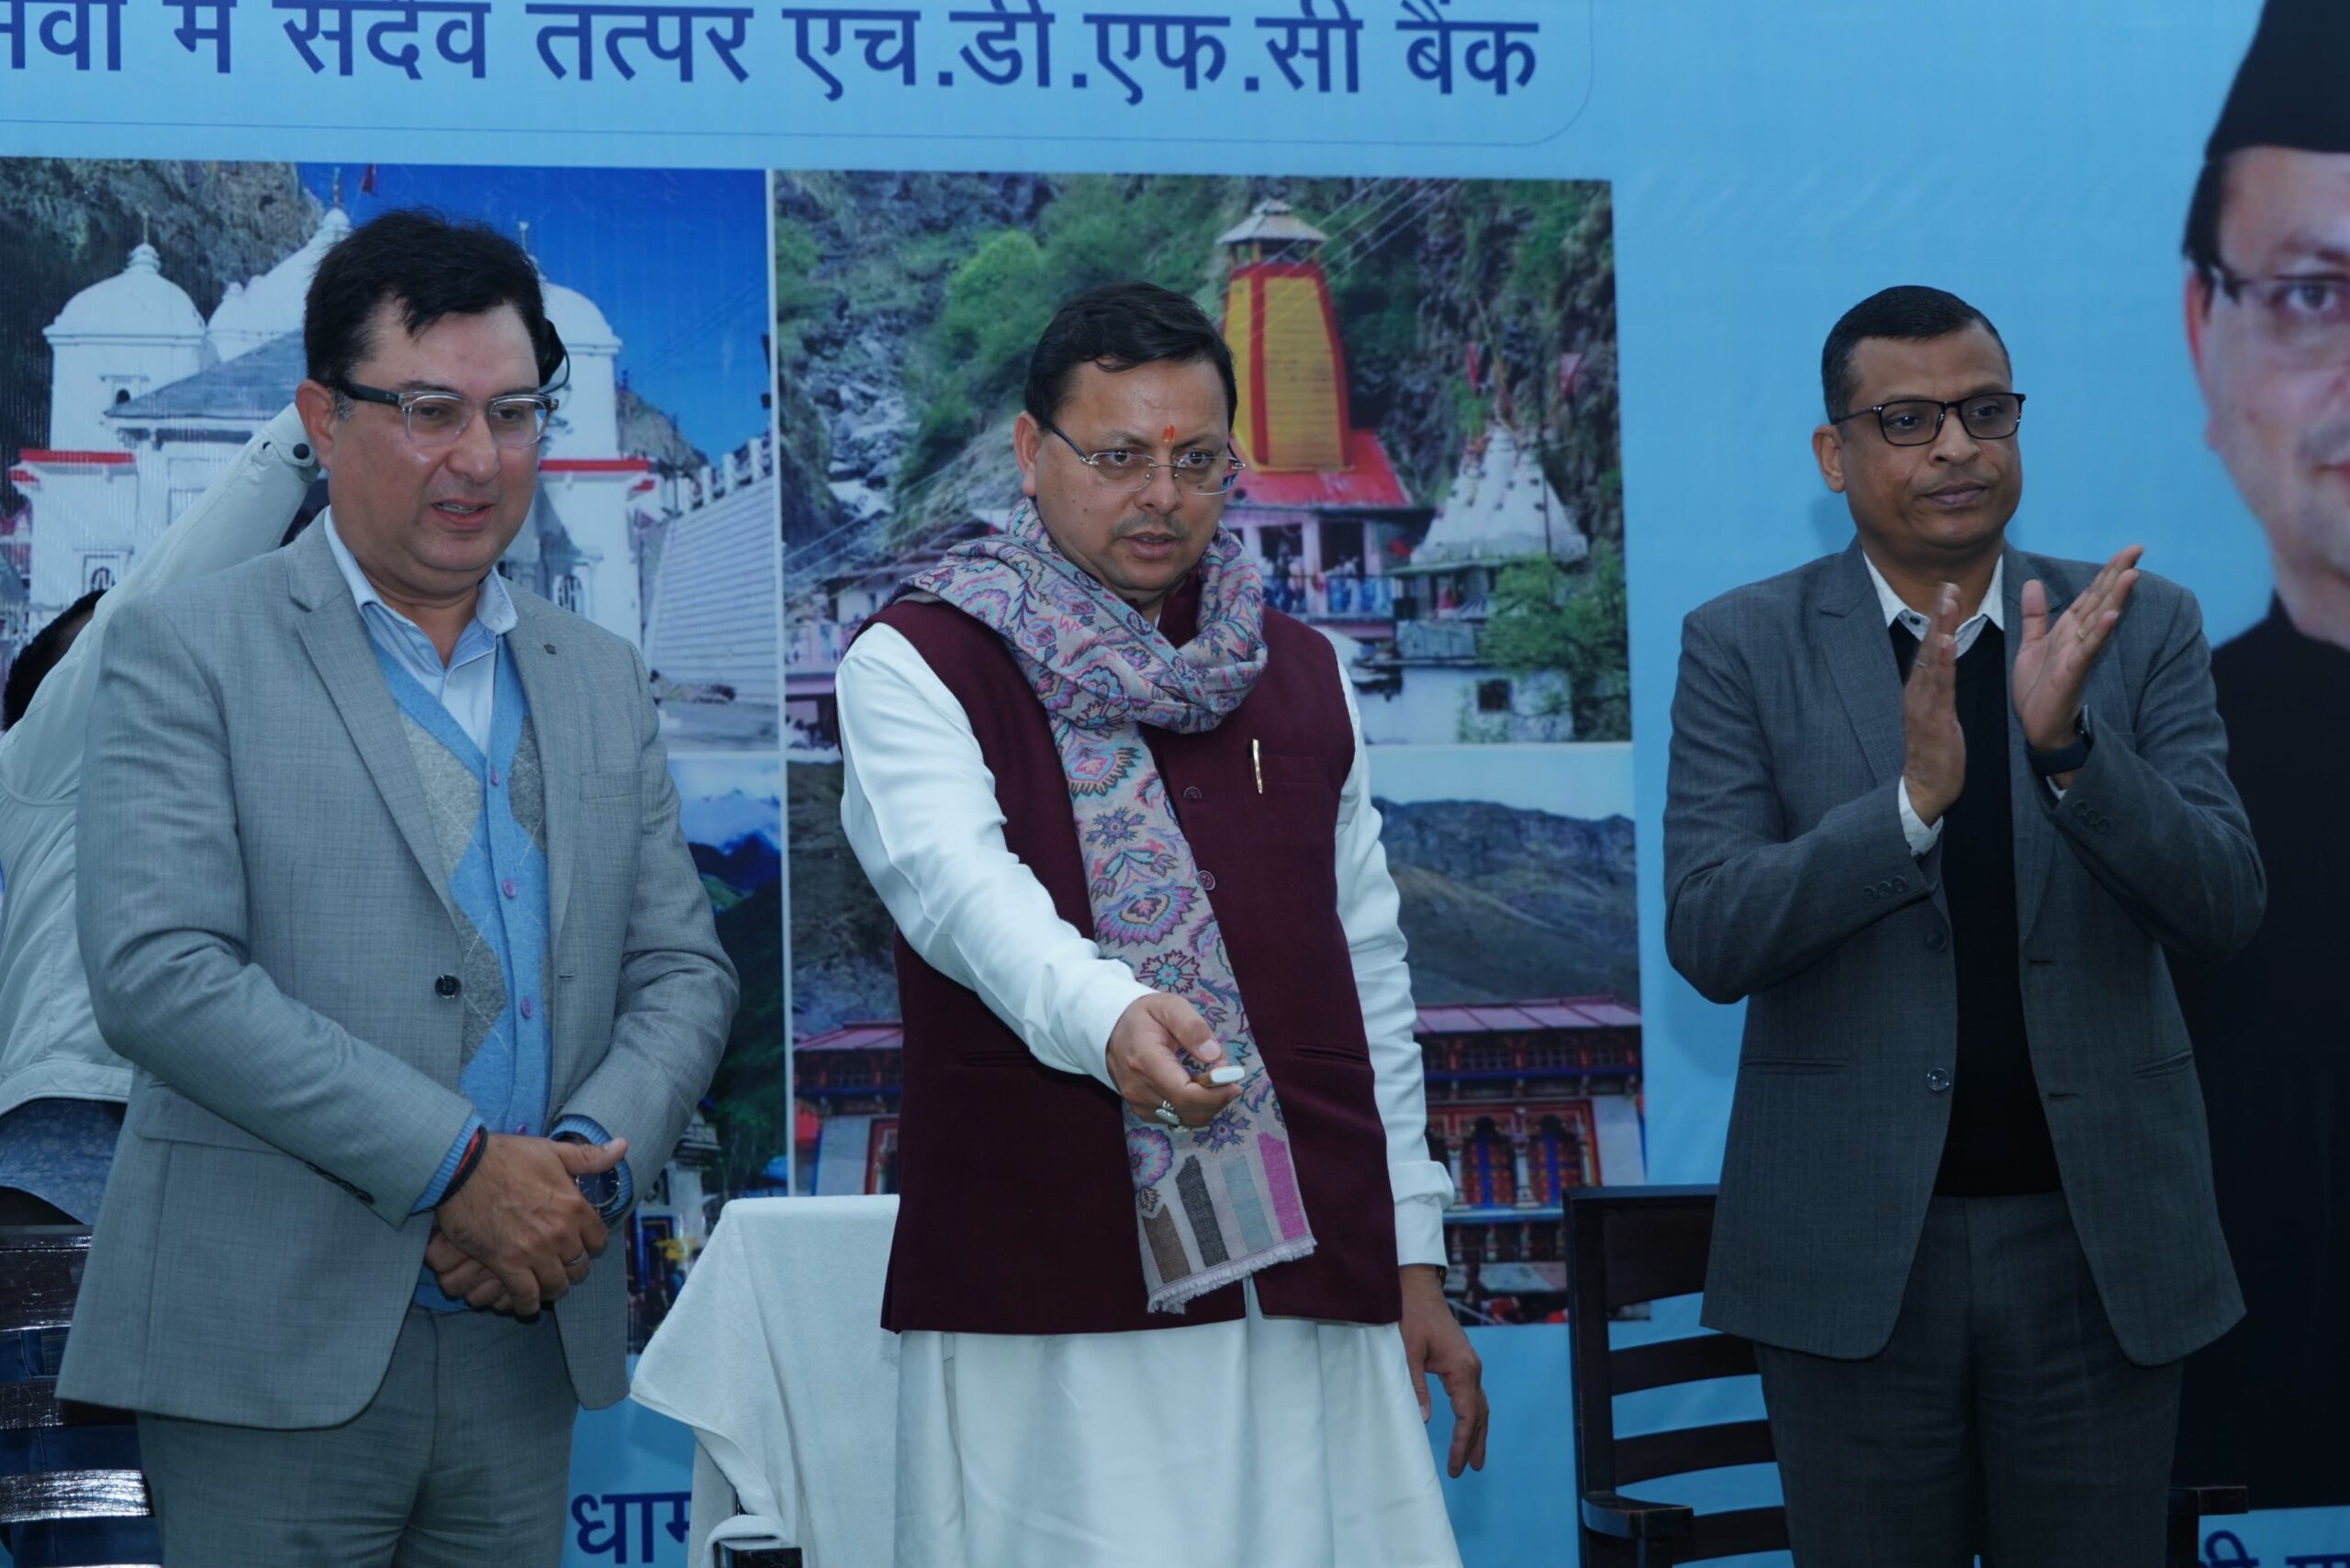 CM inaugurated various software of Yukada and ATM installed in Char Dham for the convenience of travelers